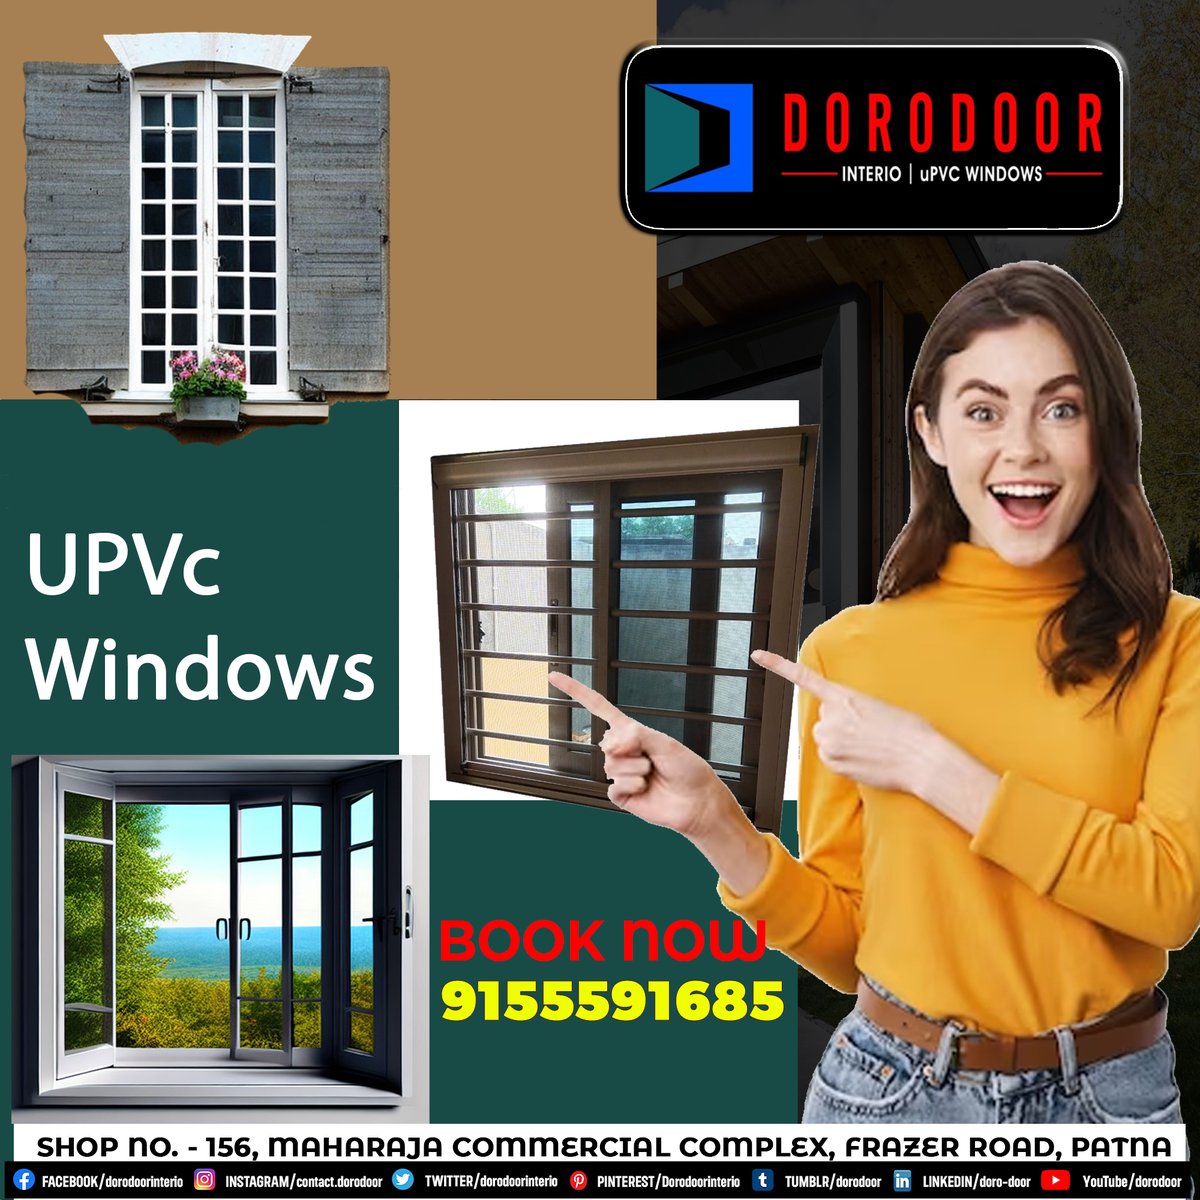 📷 Customize Your Comfort 📷 Choose from a range of designs to suit your space and taste! 📷📷 #Dorodoor #UPVCWindows #HomeUpgrade #SecureWindows #EnergyEfficient #StylishHomes #SustainableLiving #PremiumQuality #DurableWindows #WindowDesigns